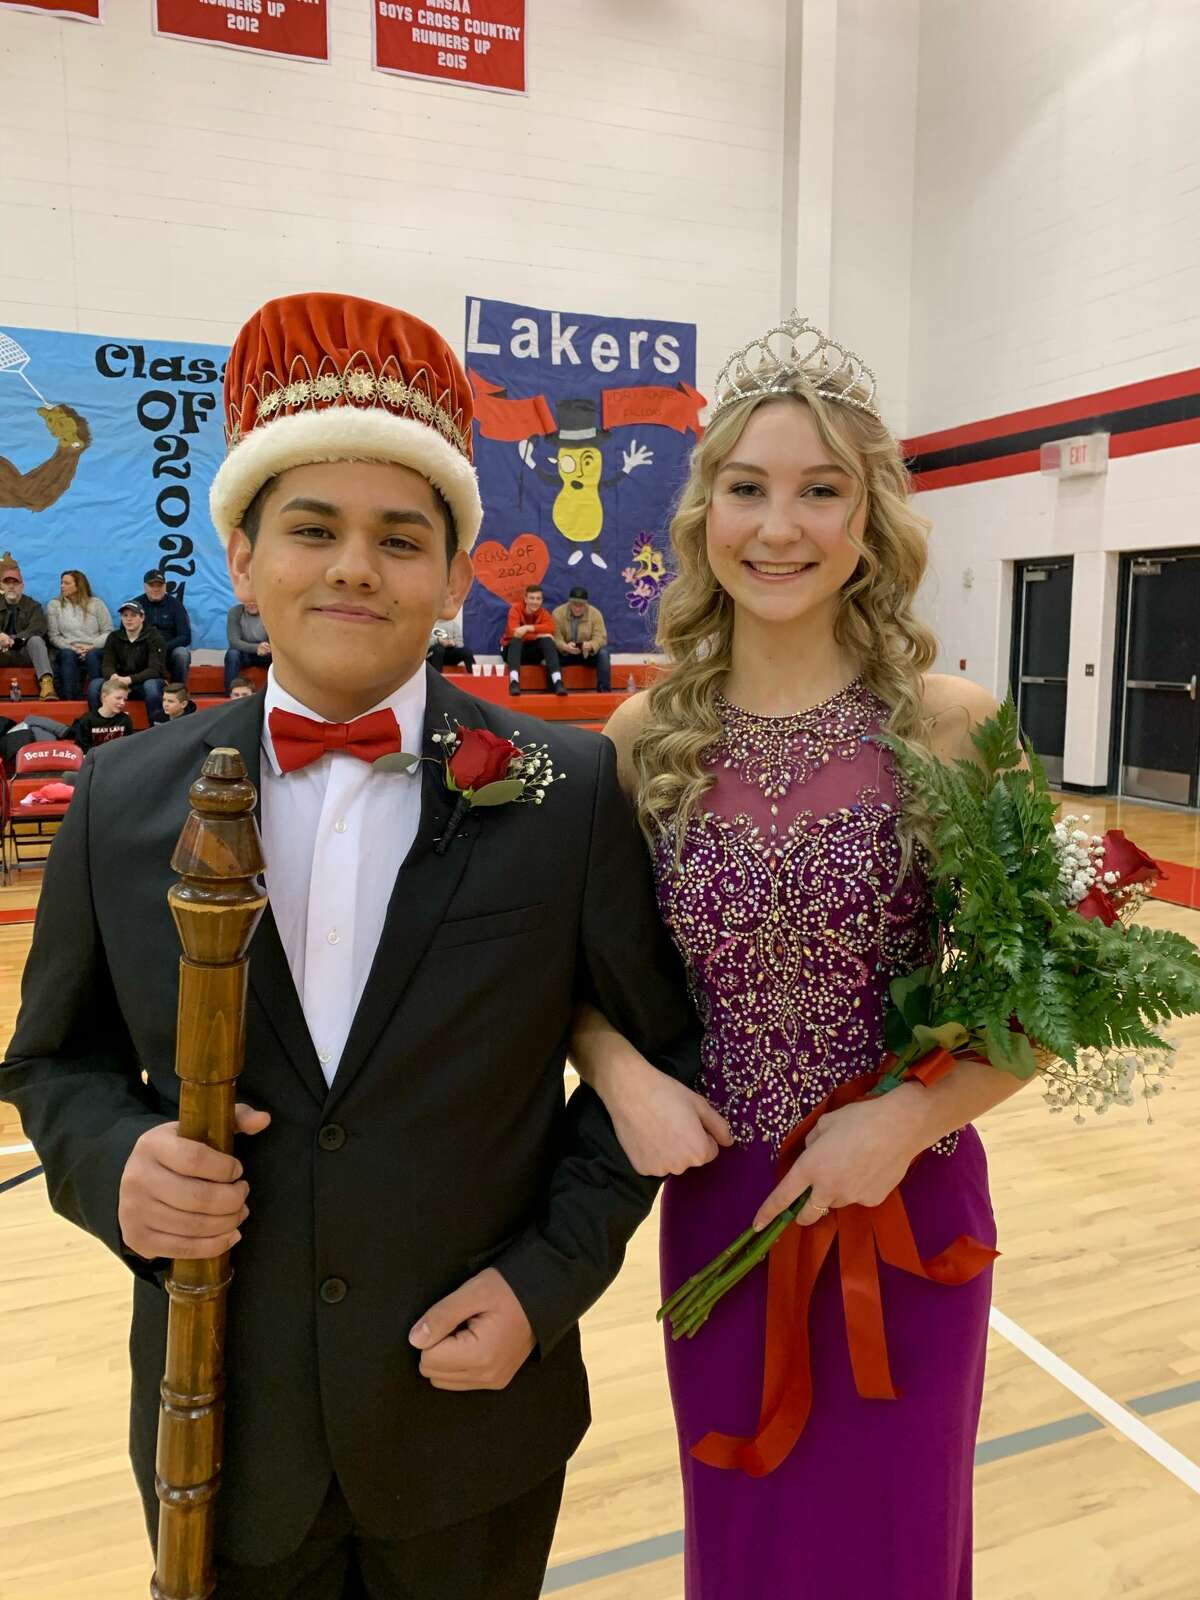 Bear Lake’s Fabian Aguilar and Shaely Waller were crowned the school’s Homecoming King and Queen for 2020 on Friday during a ceremony held at halftime of the Lakers’ varsity boys basketball game against Pentwater. 